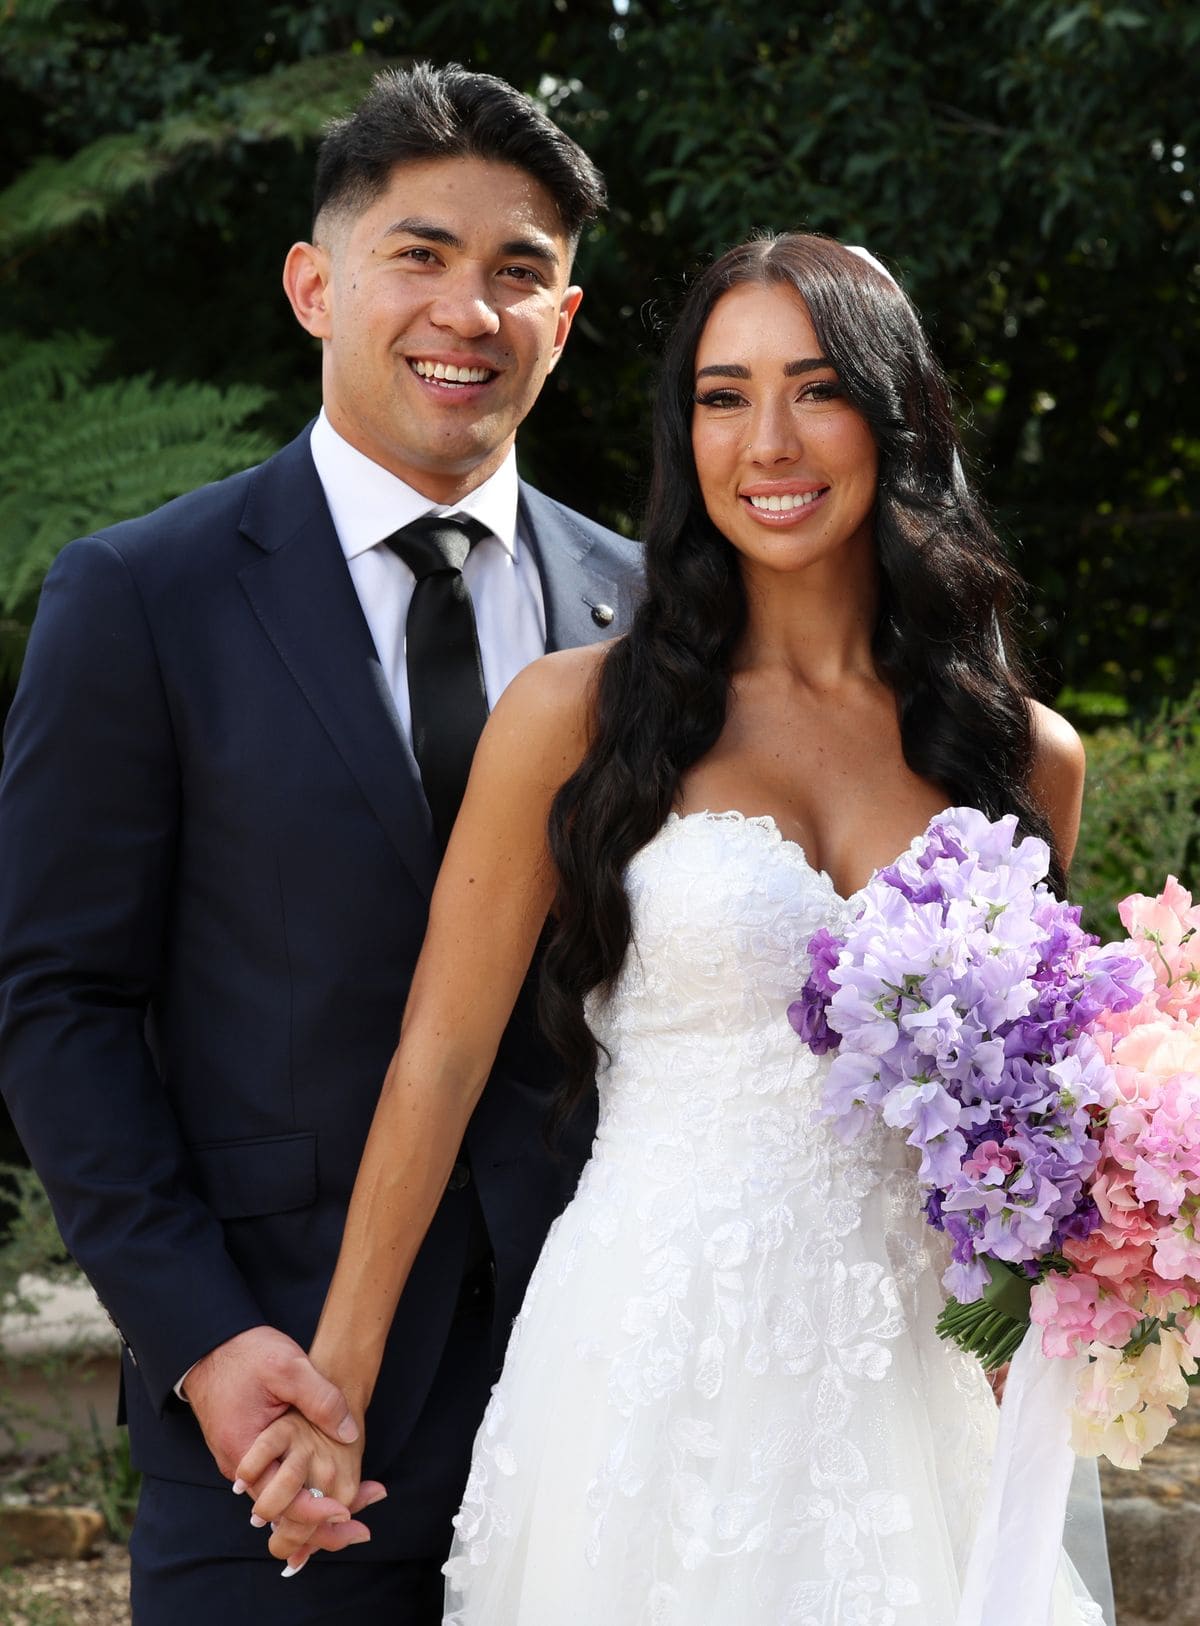 ridge and jade married at first sight